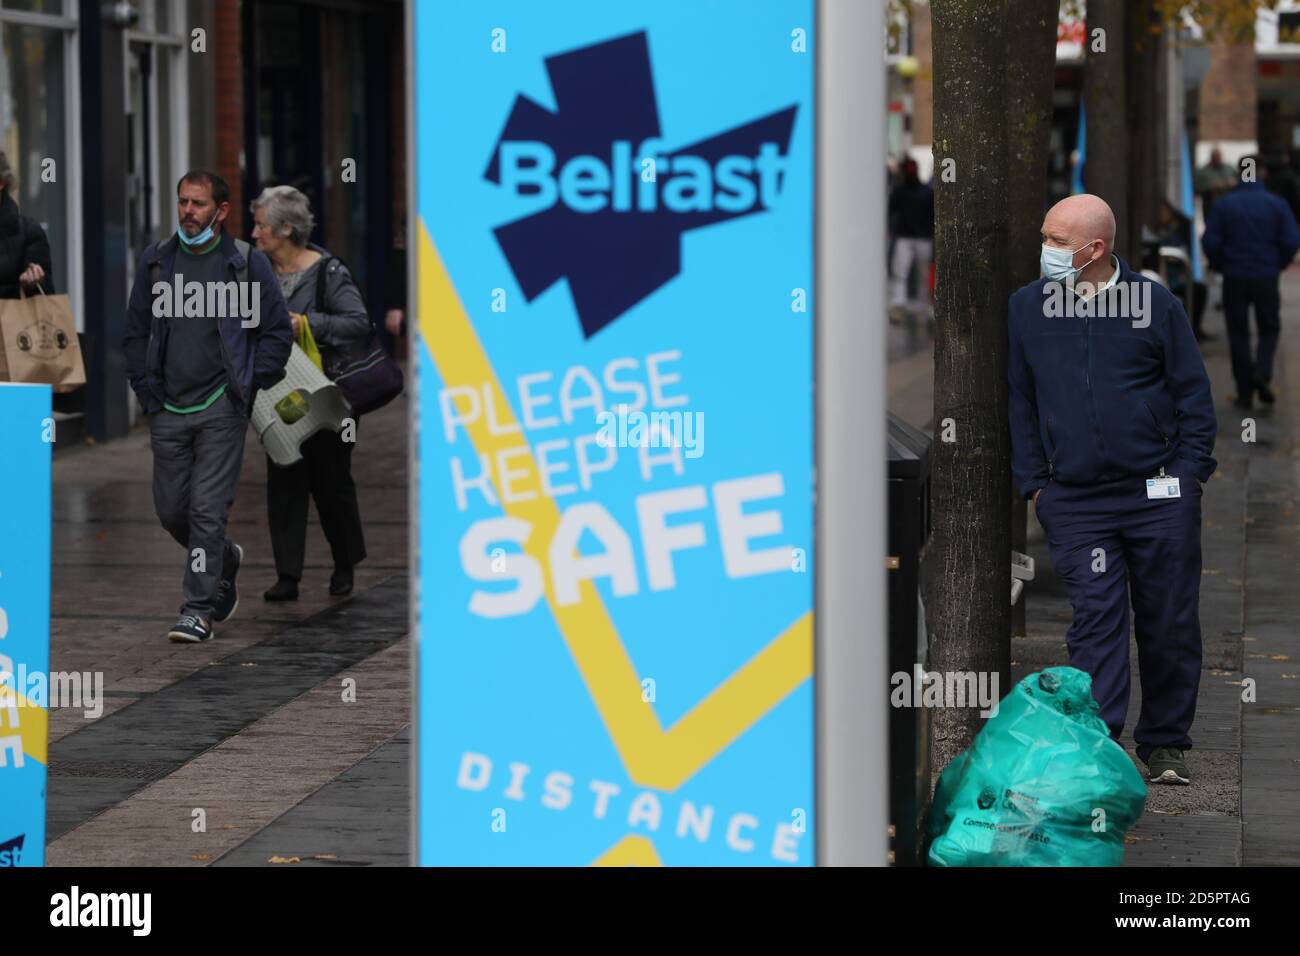 A man wearing a face mask in Belfast city centre, Northern Ireland, after the Stormont executive announced closures of schools, pubs and restaurants as the region enters a period of intensified coronavirus restrictions in response to spiralling infection rates. Stock Photo